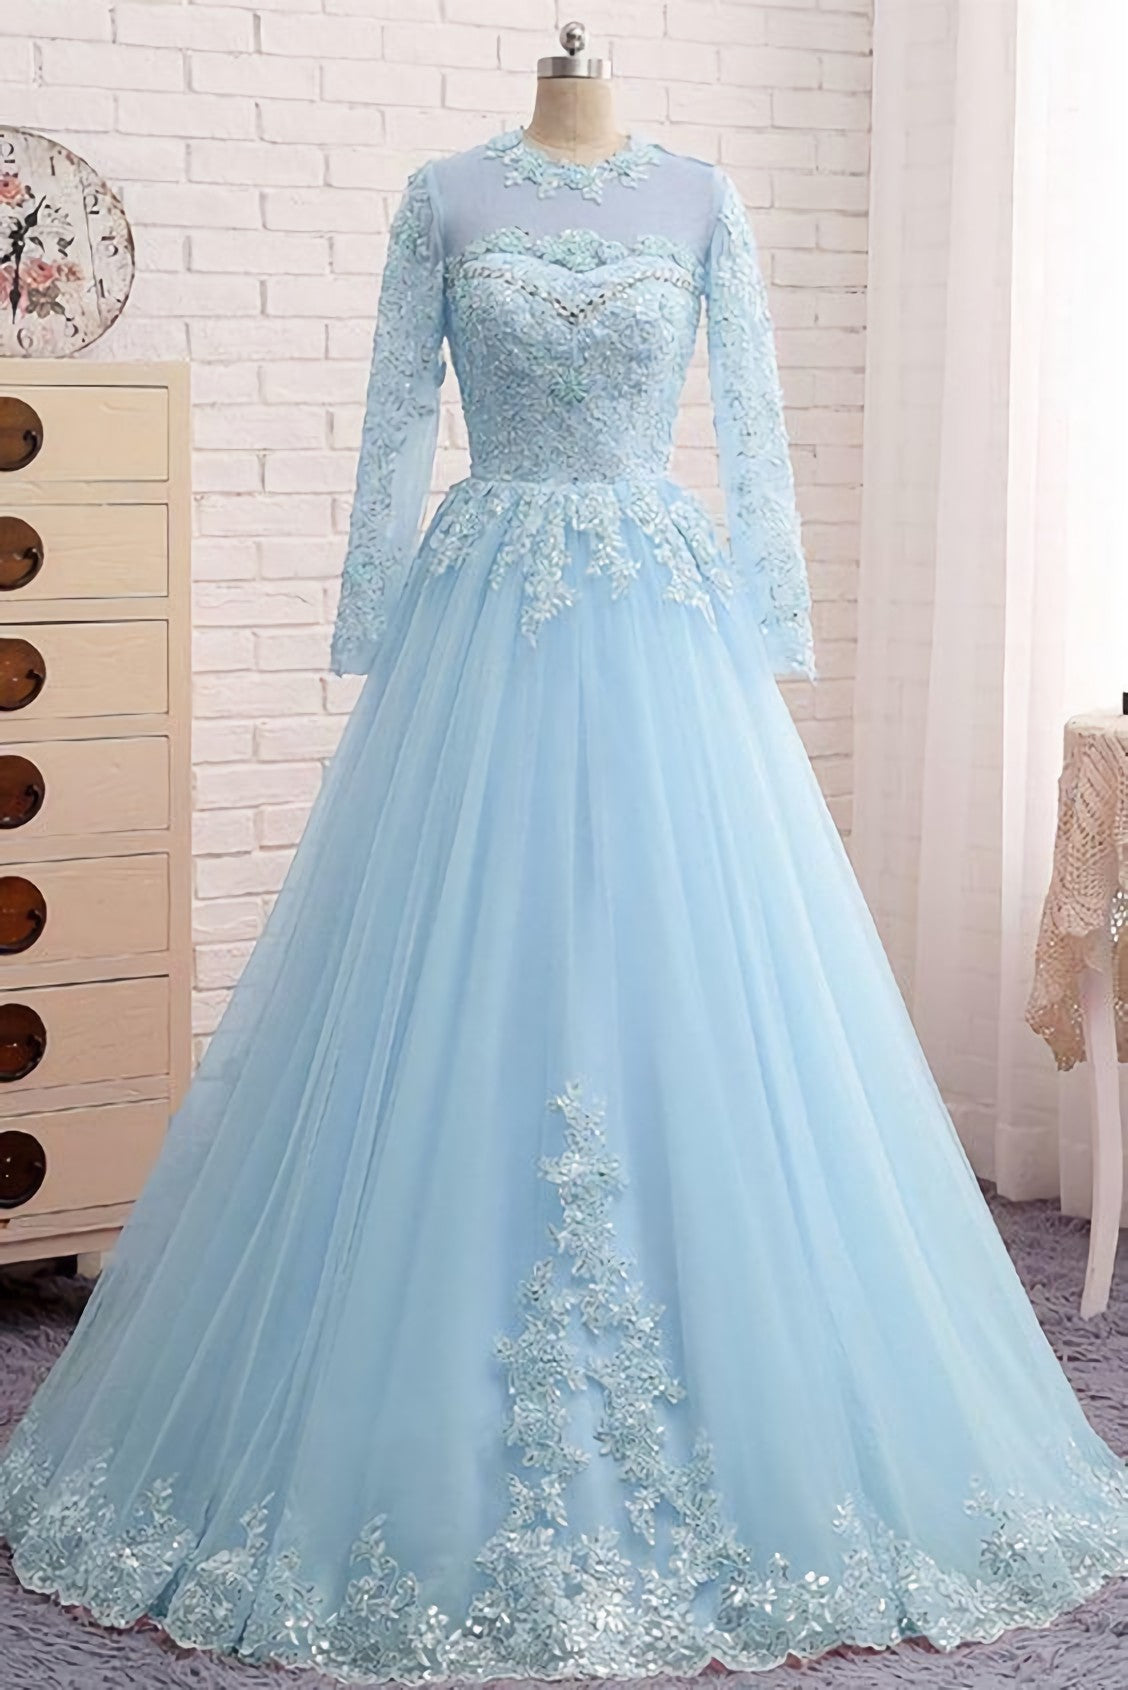 Blue Lace Tulle Long Sleeve Beaded Corset Formal Corset Prom Dress outfits, Evening Dress 1926